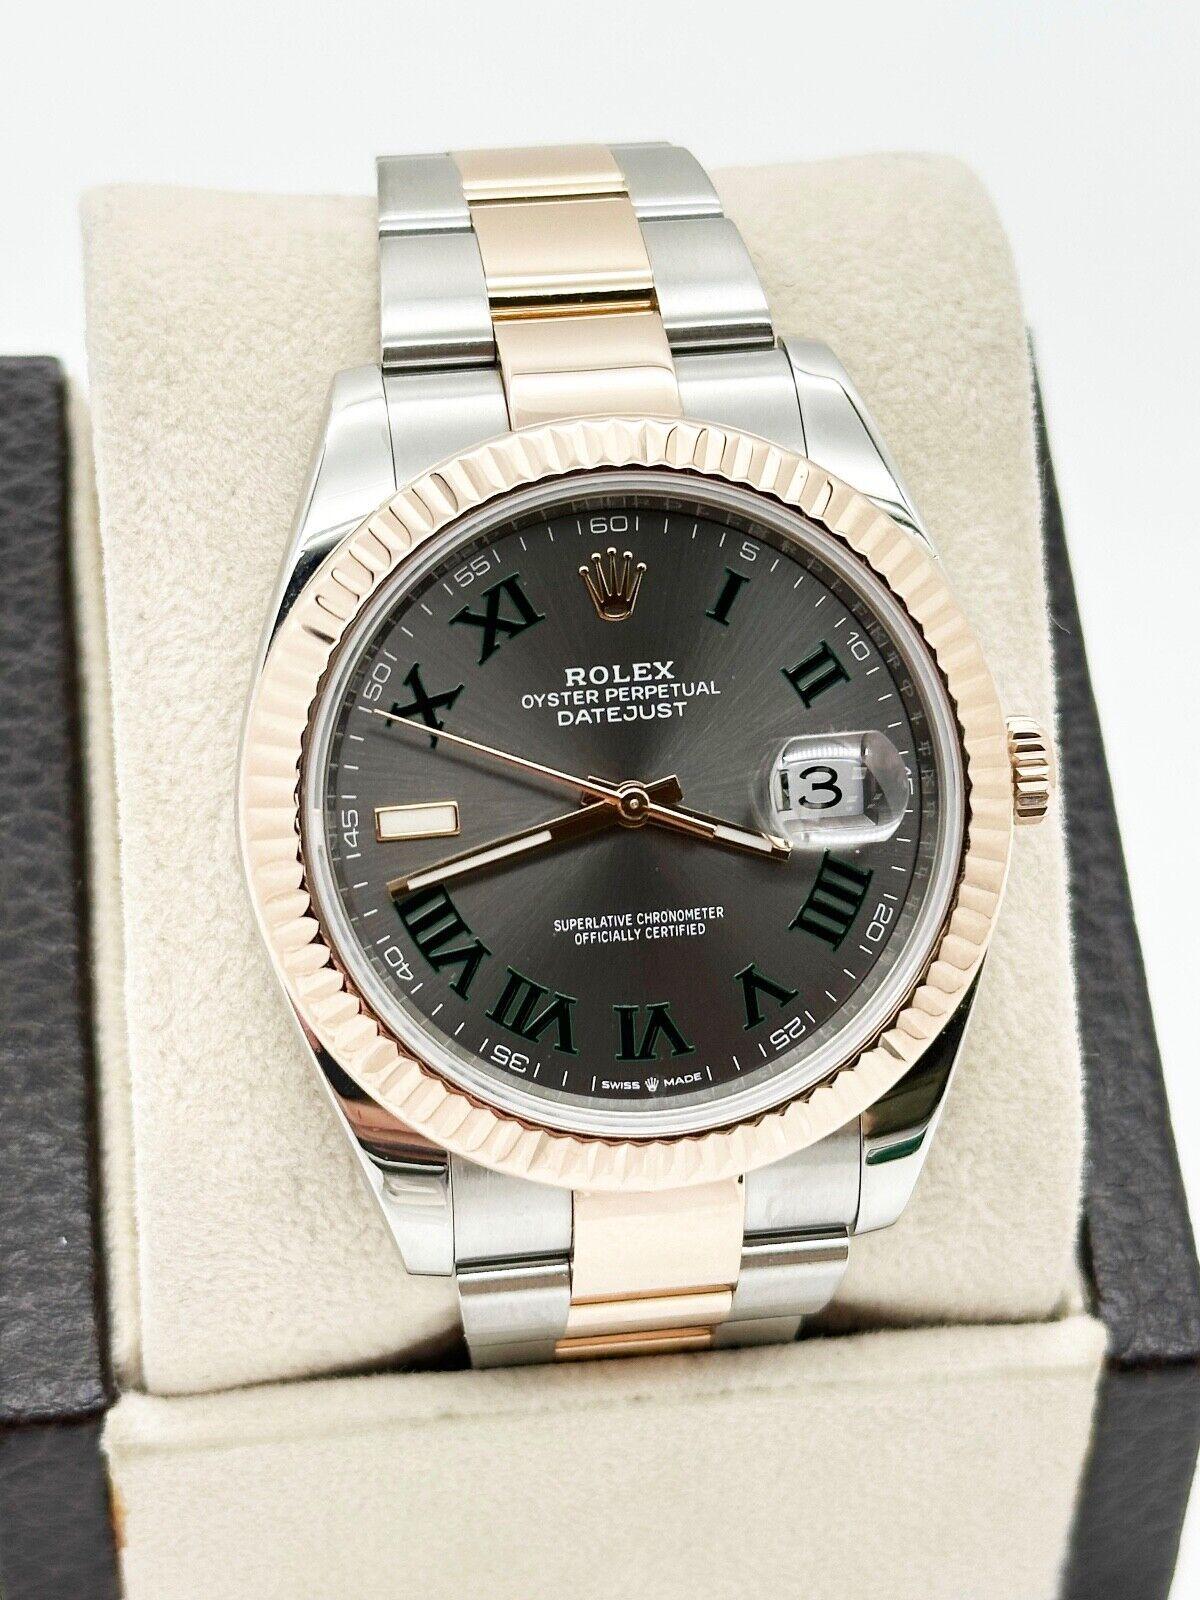 Style Number: 126331

Serial: 3Z370***

Year: 2020
 
Model: Datejust 41
 
Case Material: Stainless Steel
 
Band: 18K Rose Gold & Stainless Steel
 
Bezel: 18K Rose Gold
 
Dial: Wimbledon 
 
Face: Sapphire Crystal
 
Case Size: 41mm
 
Includes: 
-Rolex